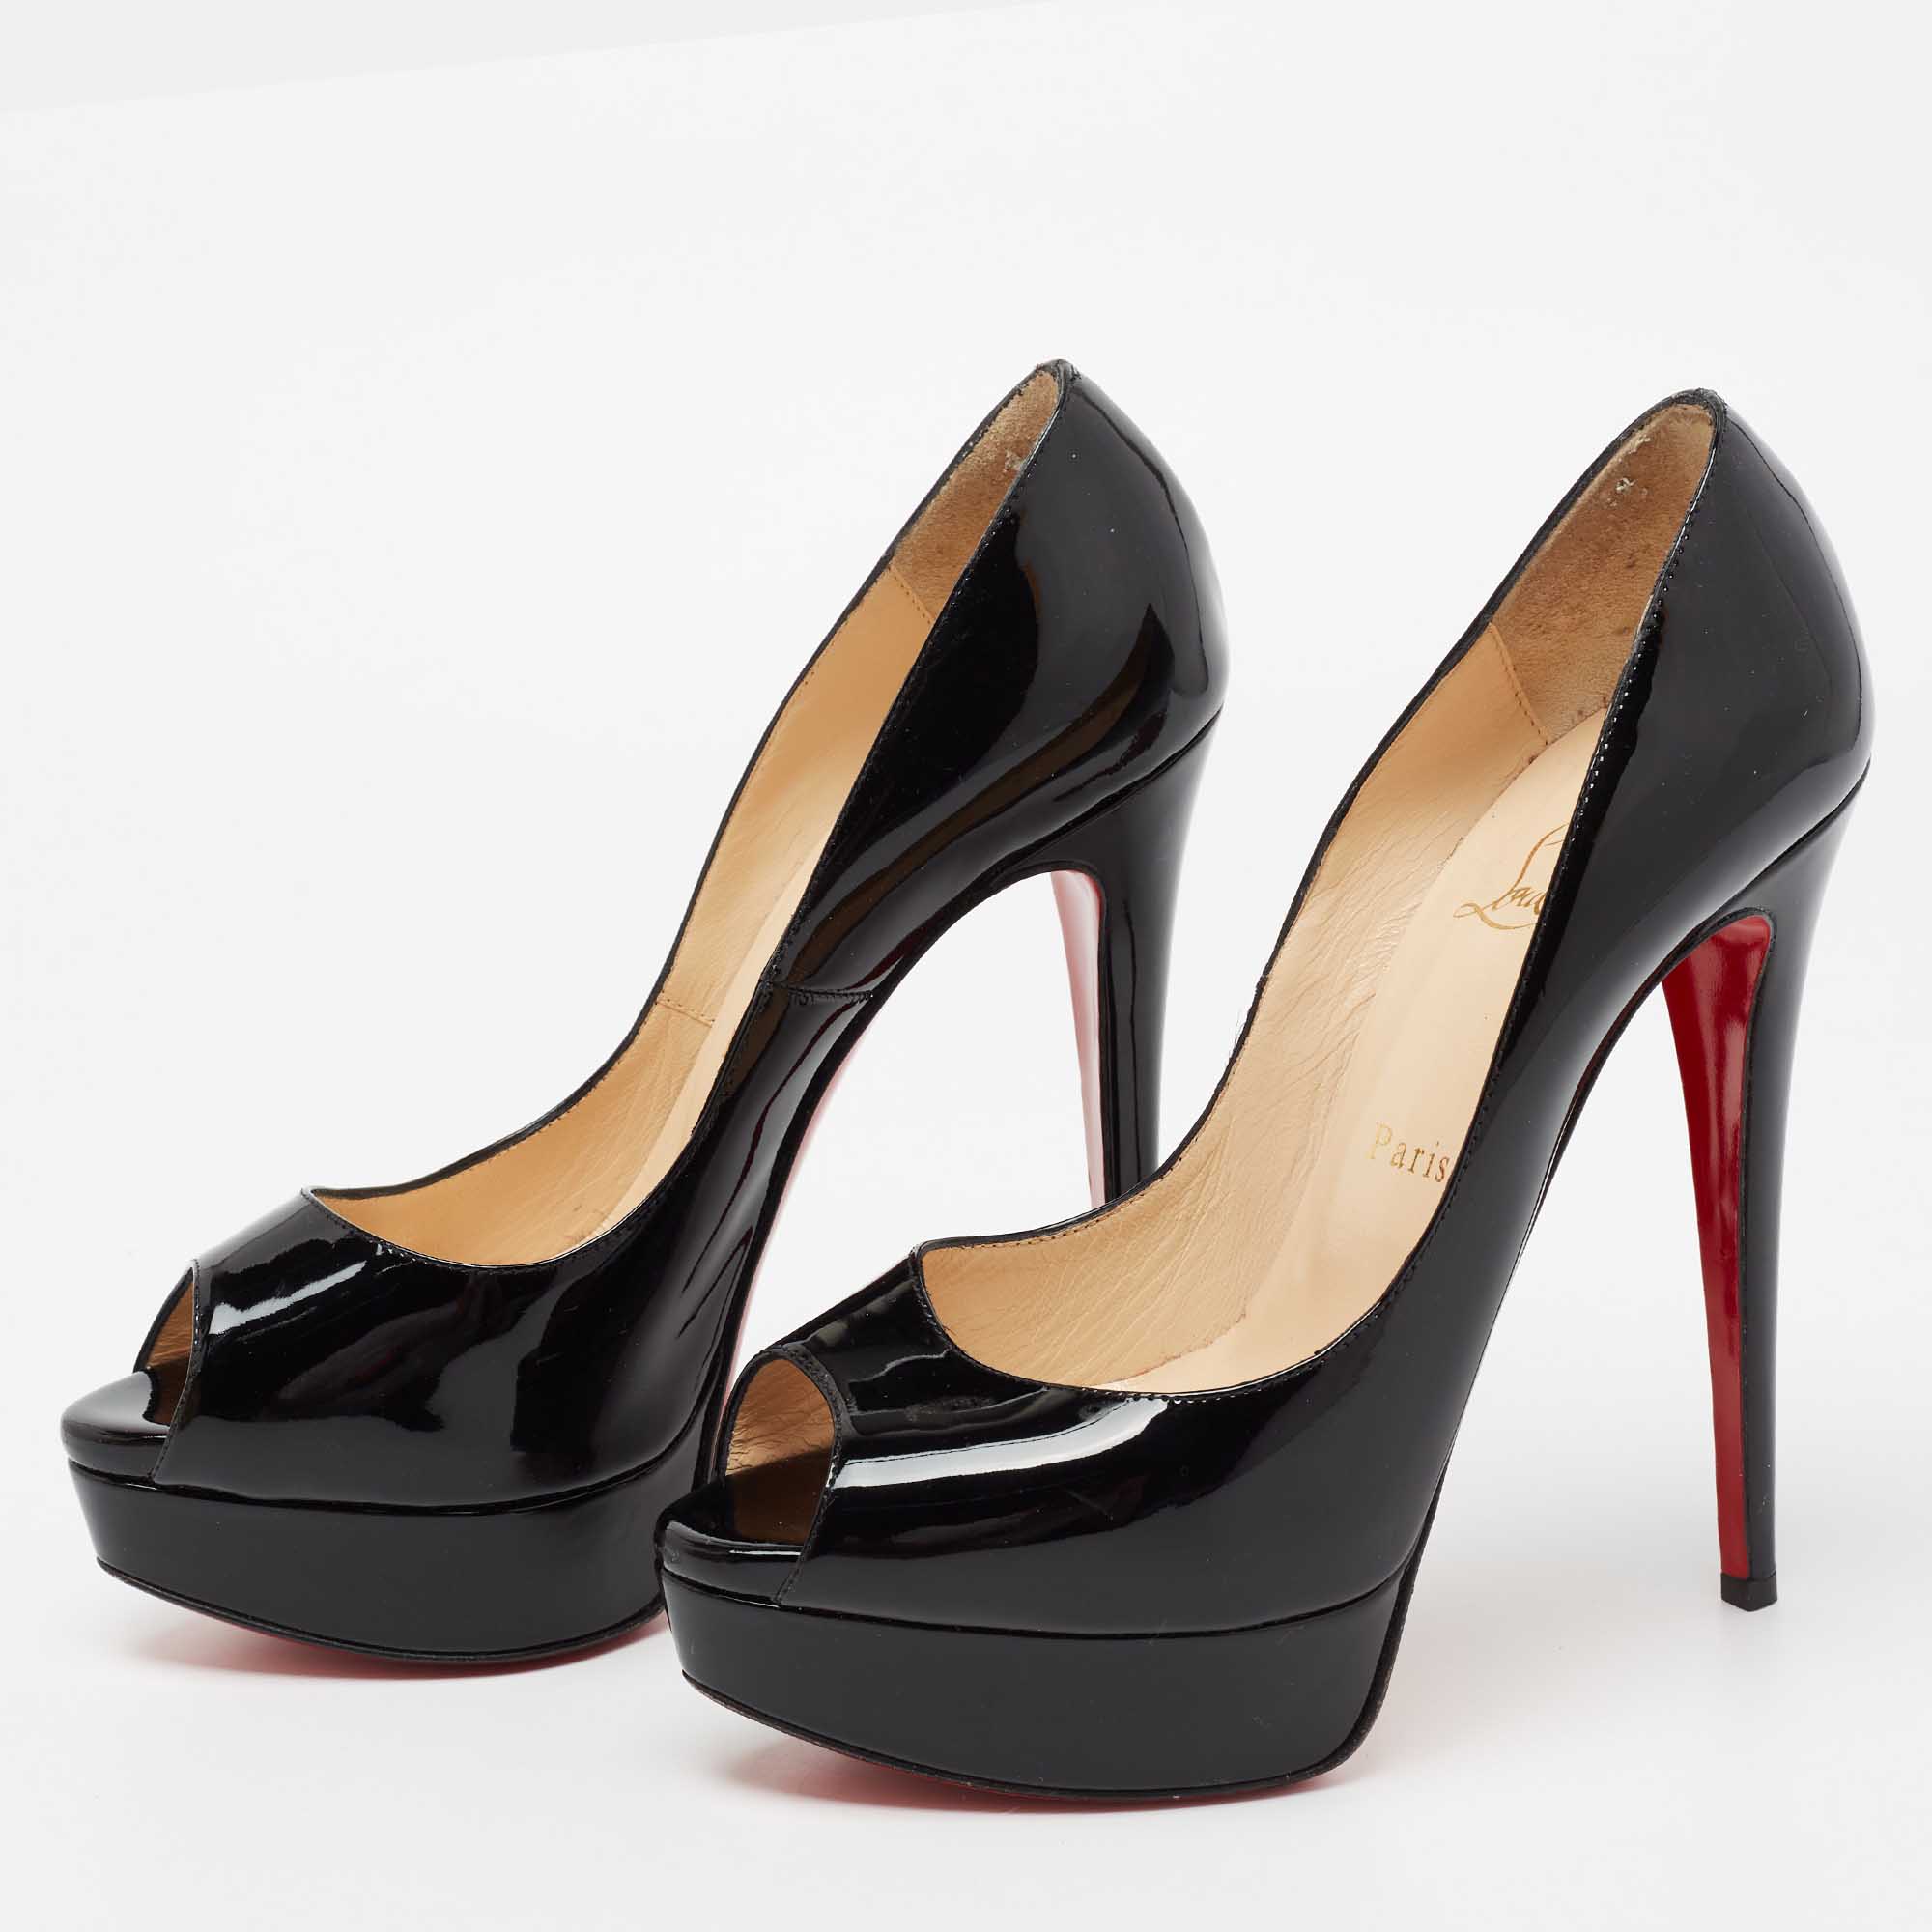 Christian Louboutin Black Patent Leather Lady Peep-Toe Platform Pumps Size 38.5  - buy with discount